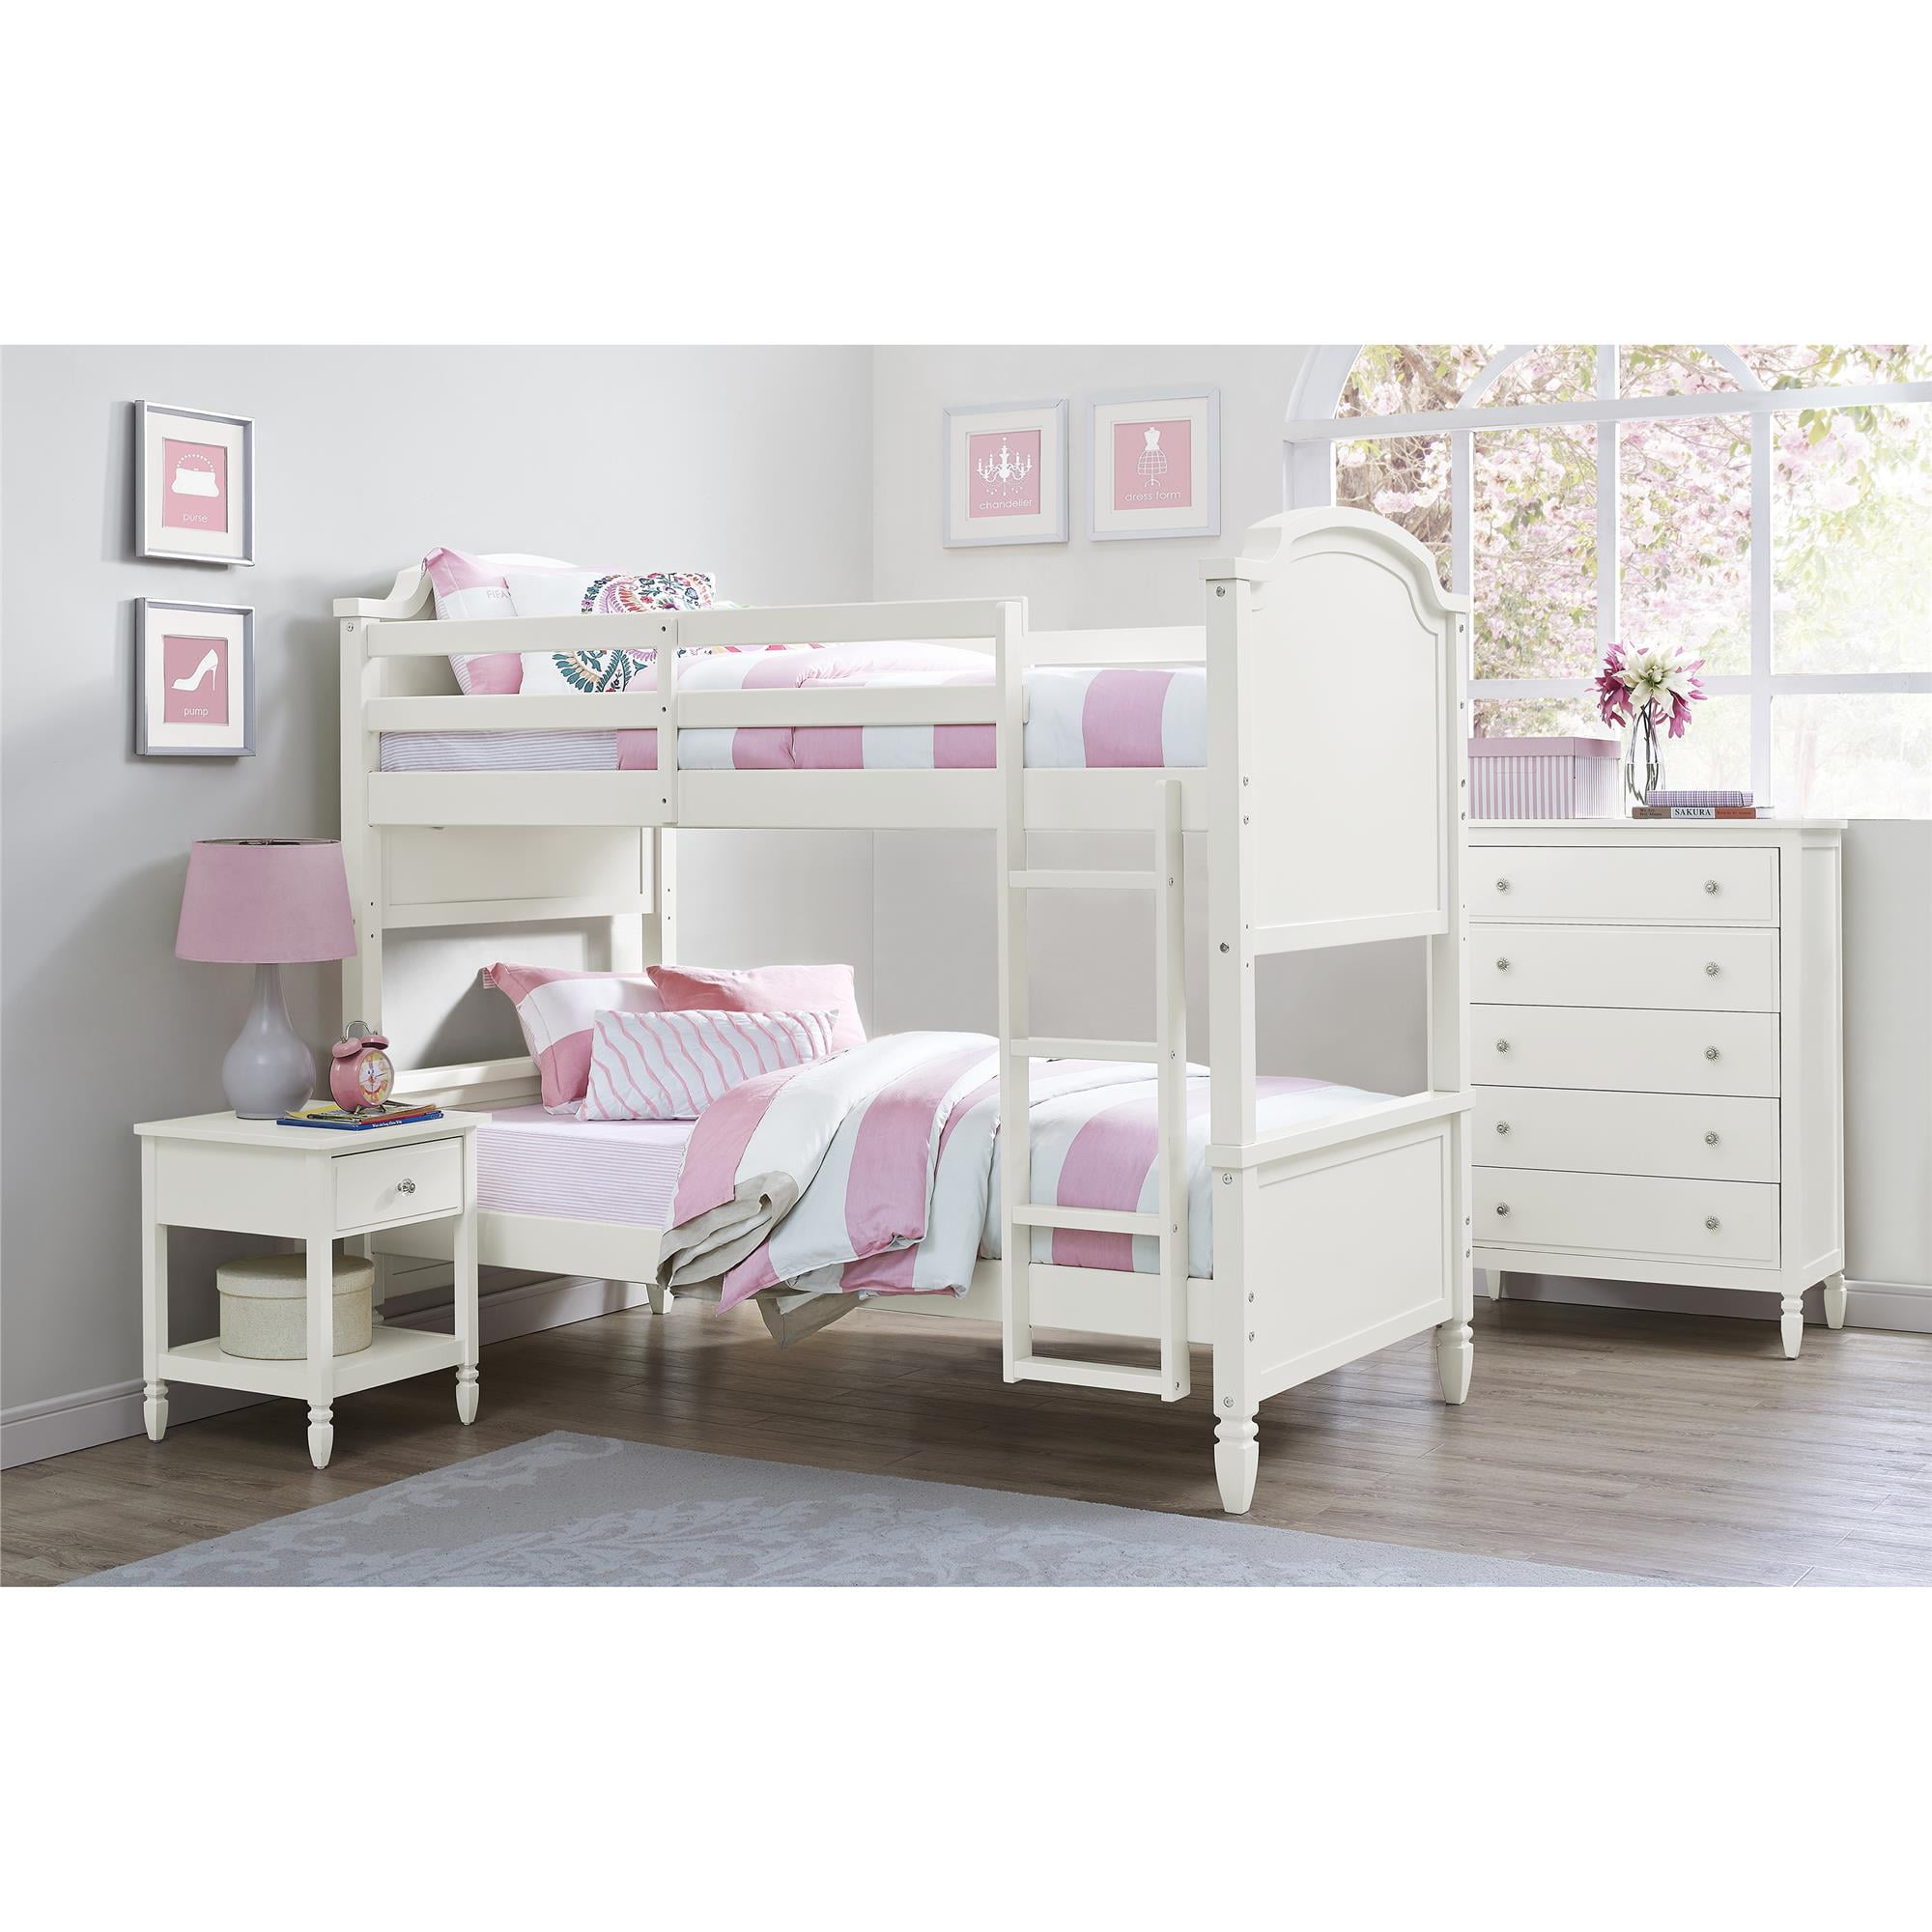 And Gardens Lillian Twin Bunk Bed, White Bunk Bed Bedroom Sets